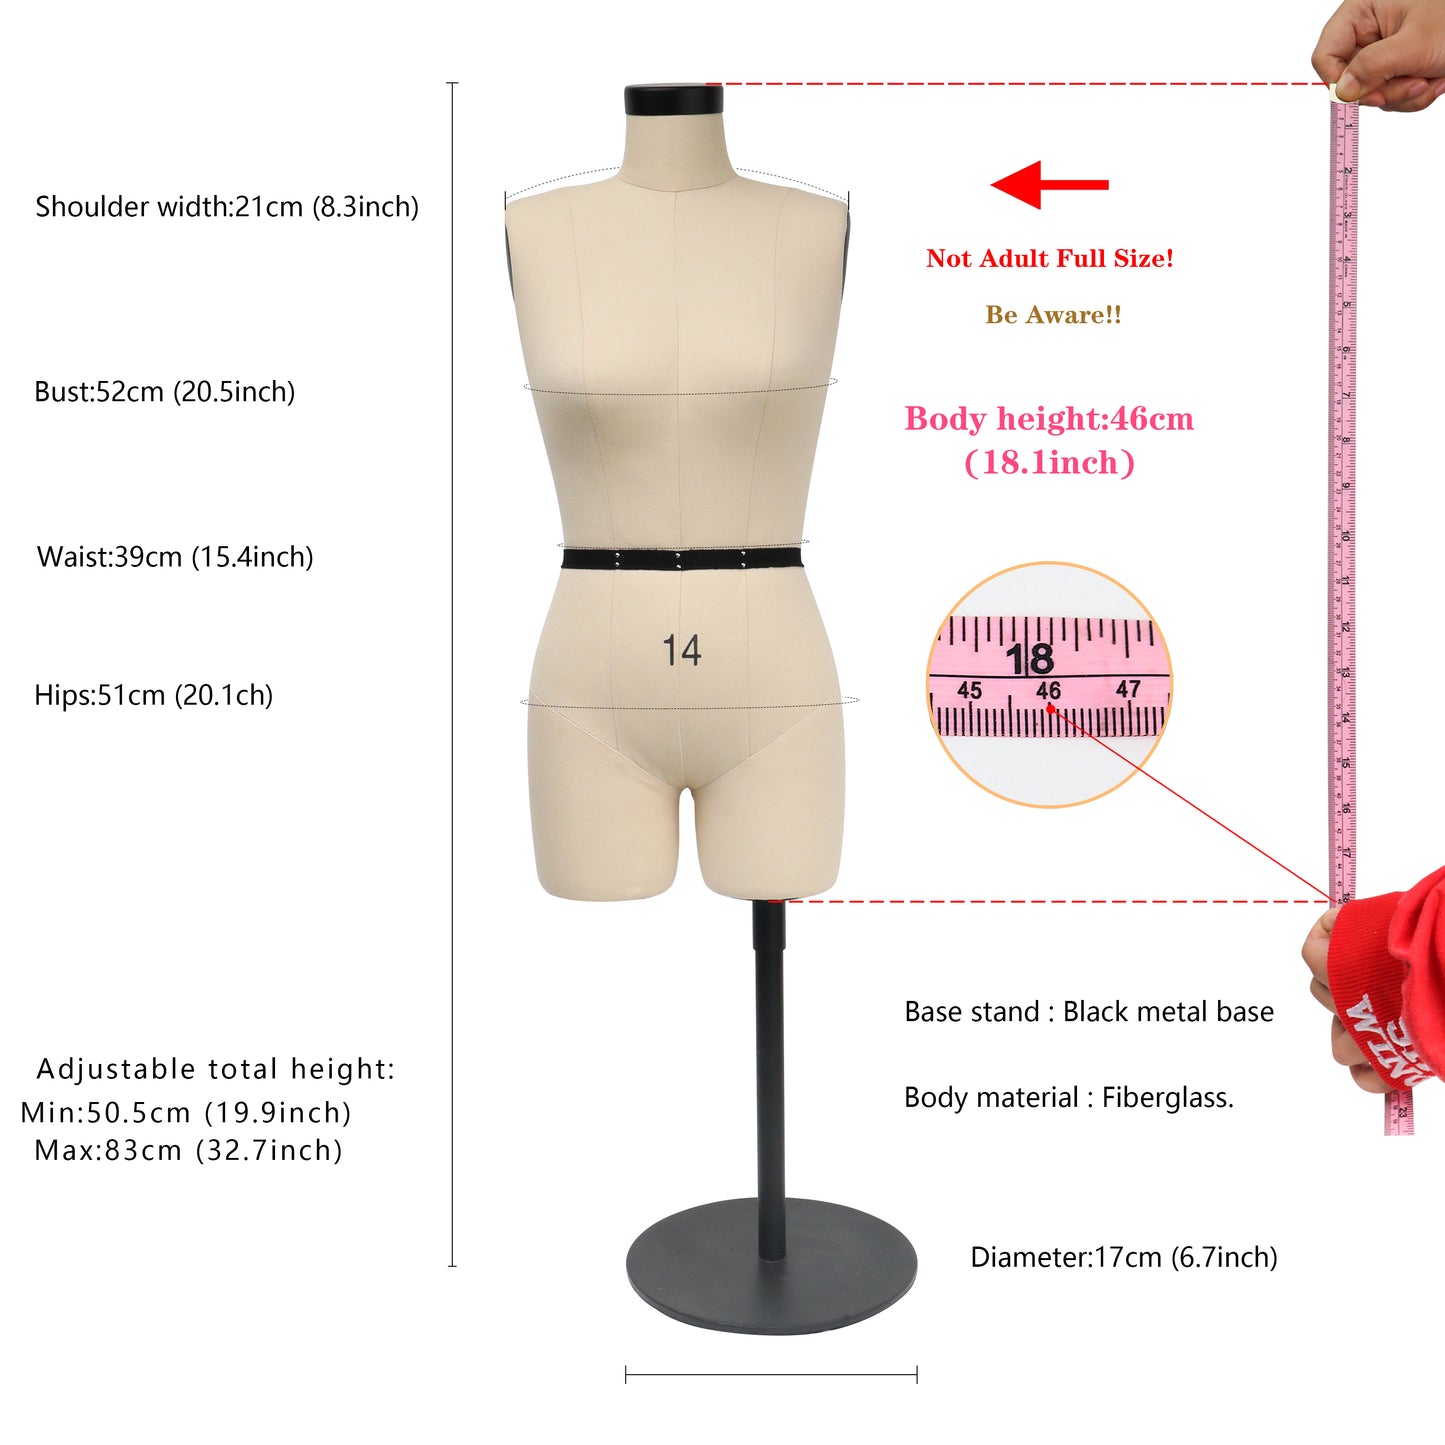 Jelimate Size 14 Female Half Scale Dress Form For Sewing,Mini Tailor Mannequin for Fashion Designer Pattern Making,Miniature Women Sewing Mannequin for Fashion School Draping Mannequin